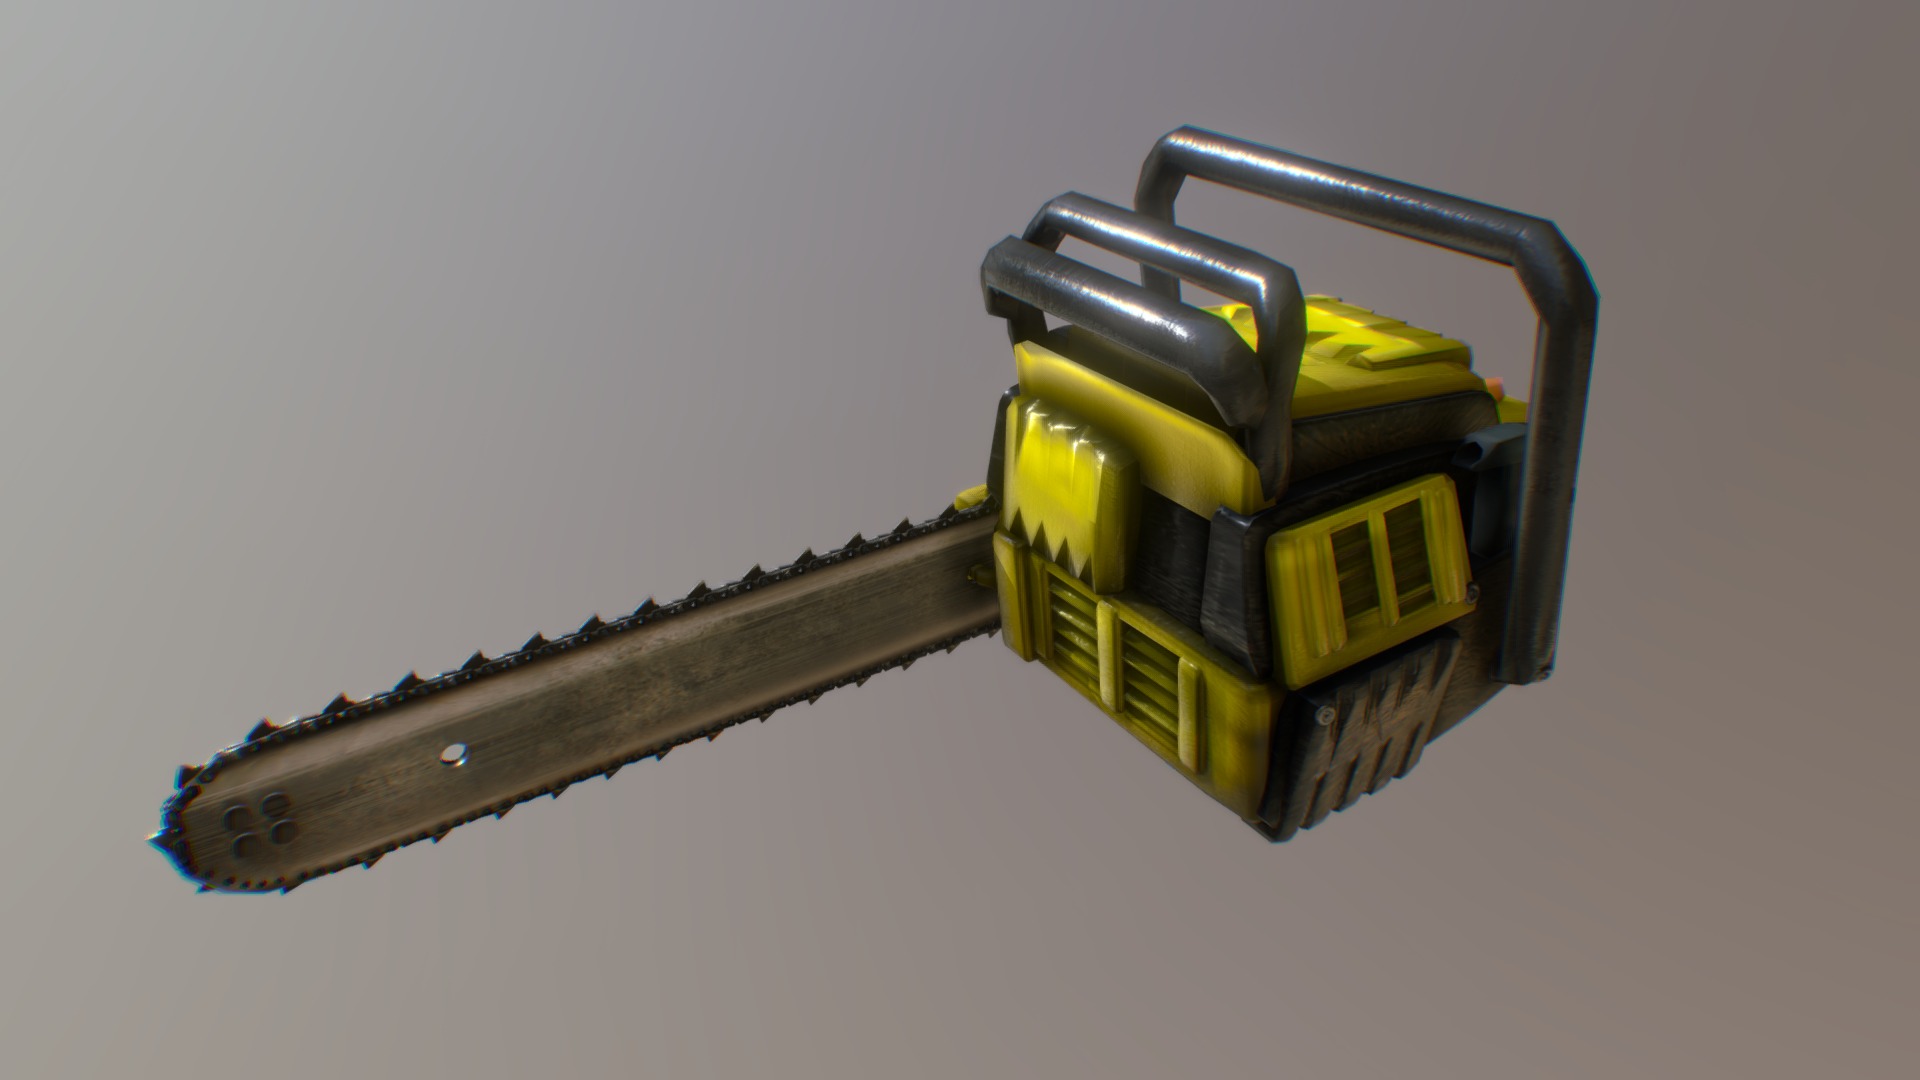 3D model Commercial – Chainsaw – Version 2 - This is a 3D model of the Commercial - Chainsaw - Version 2. The 3D model is about a yellow and black machine.